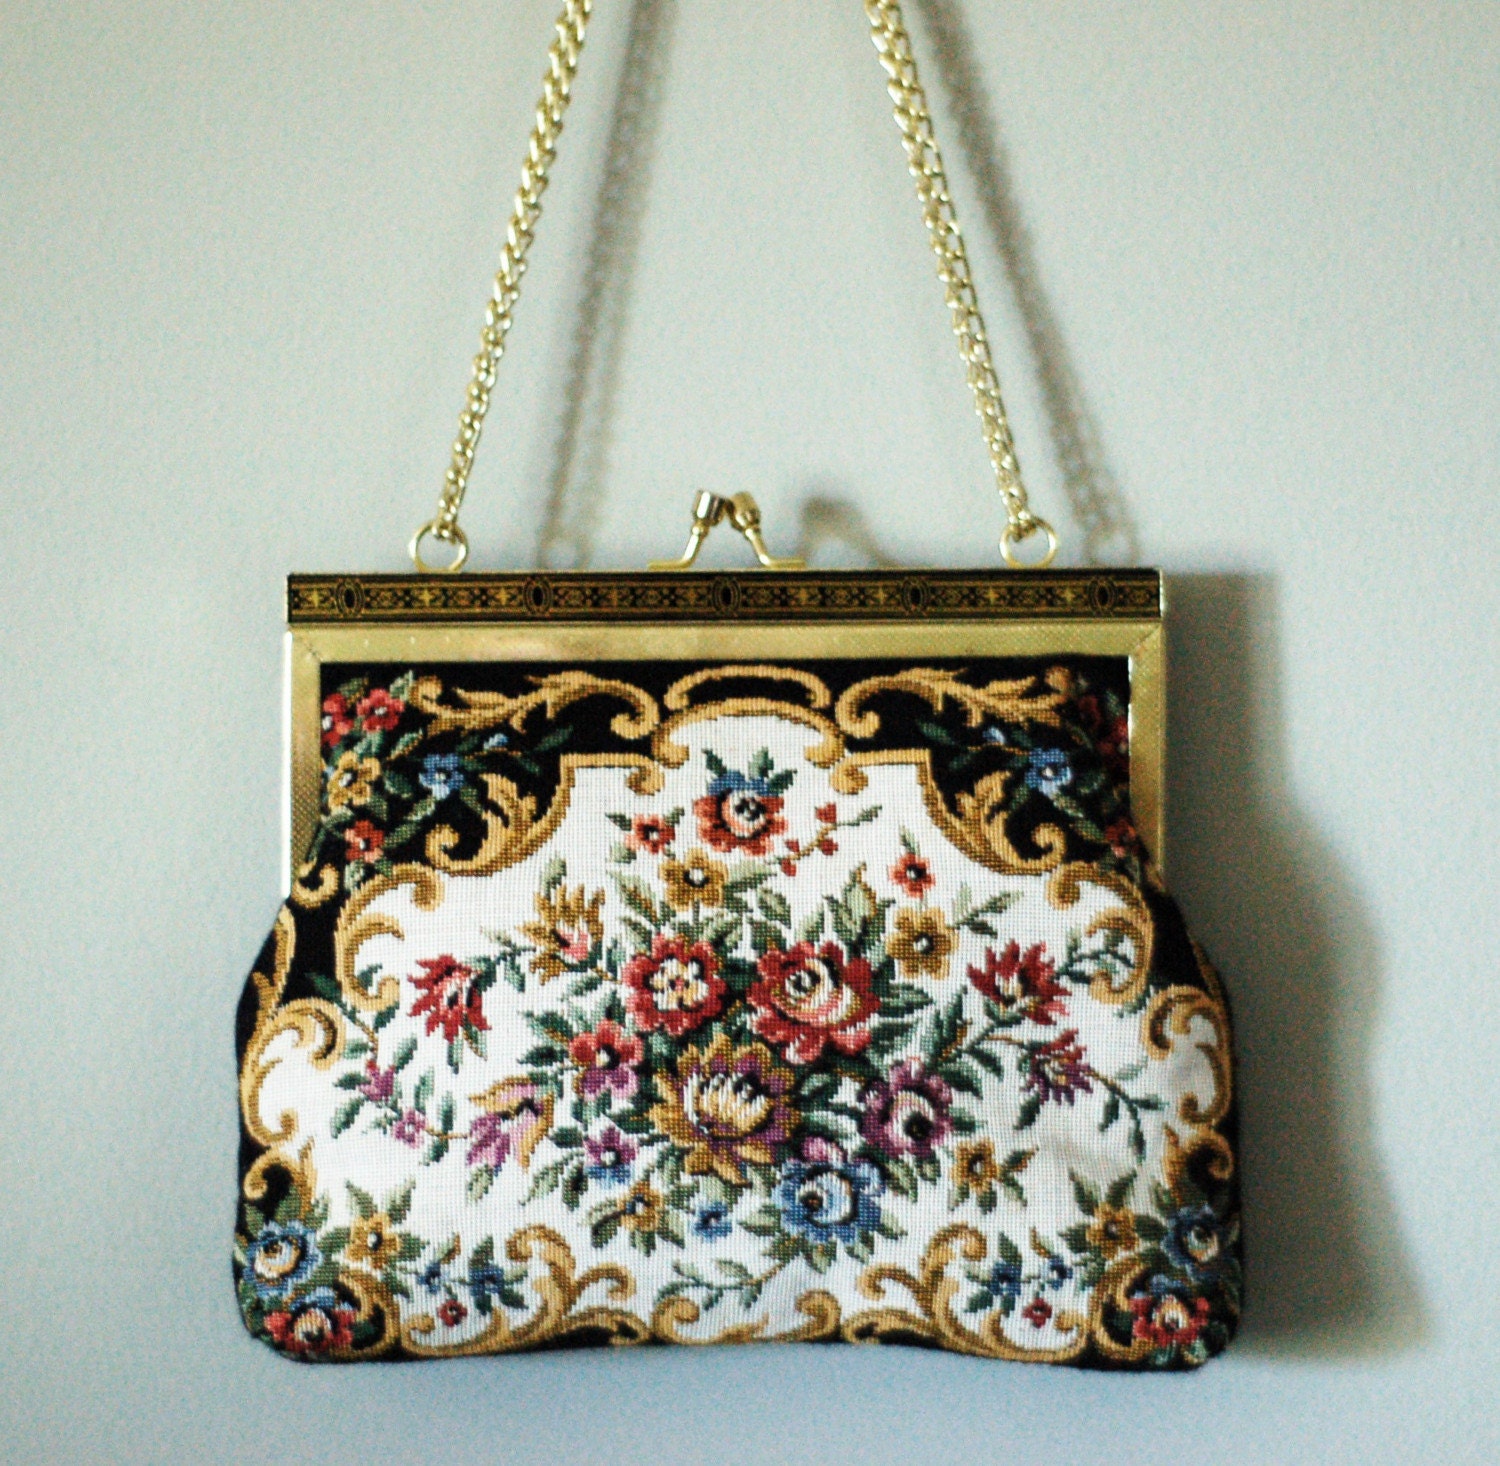 Vintage Coin Purse Style Evening Bag